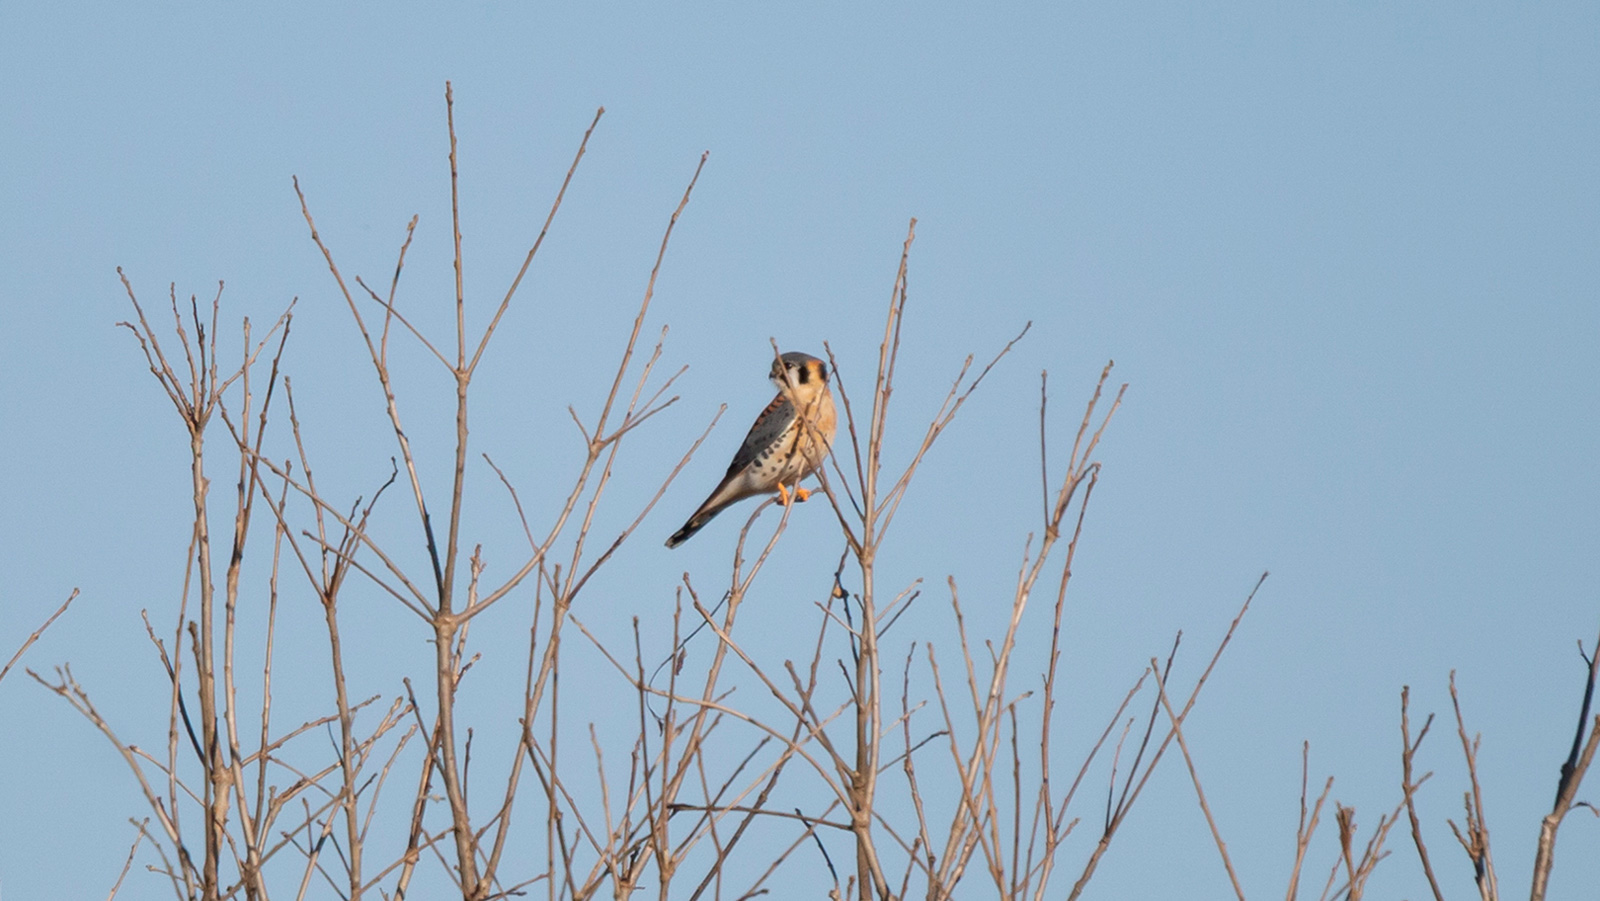 American kestrel perched on a bare tree